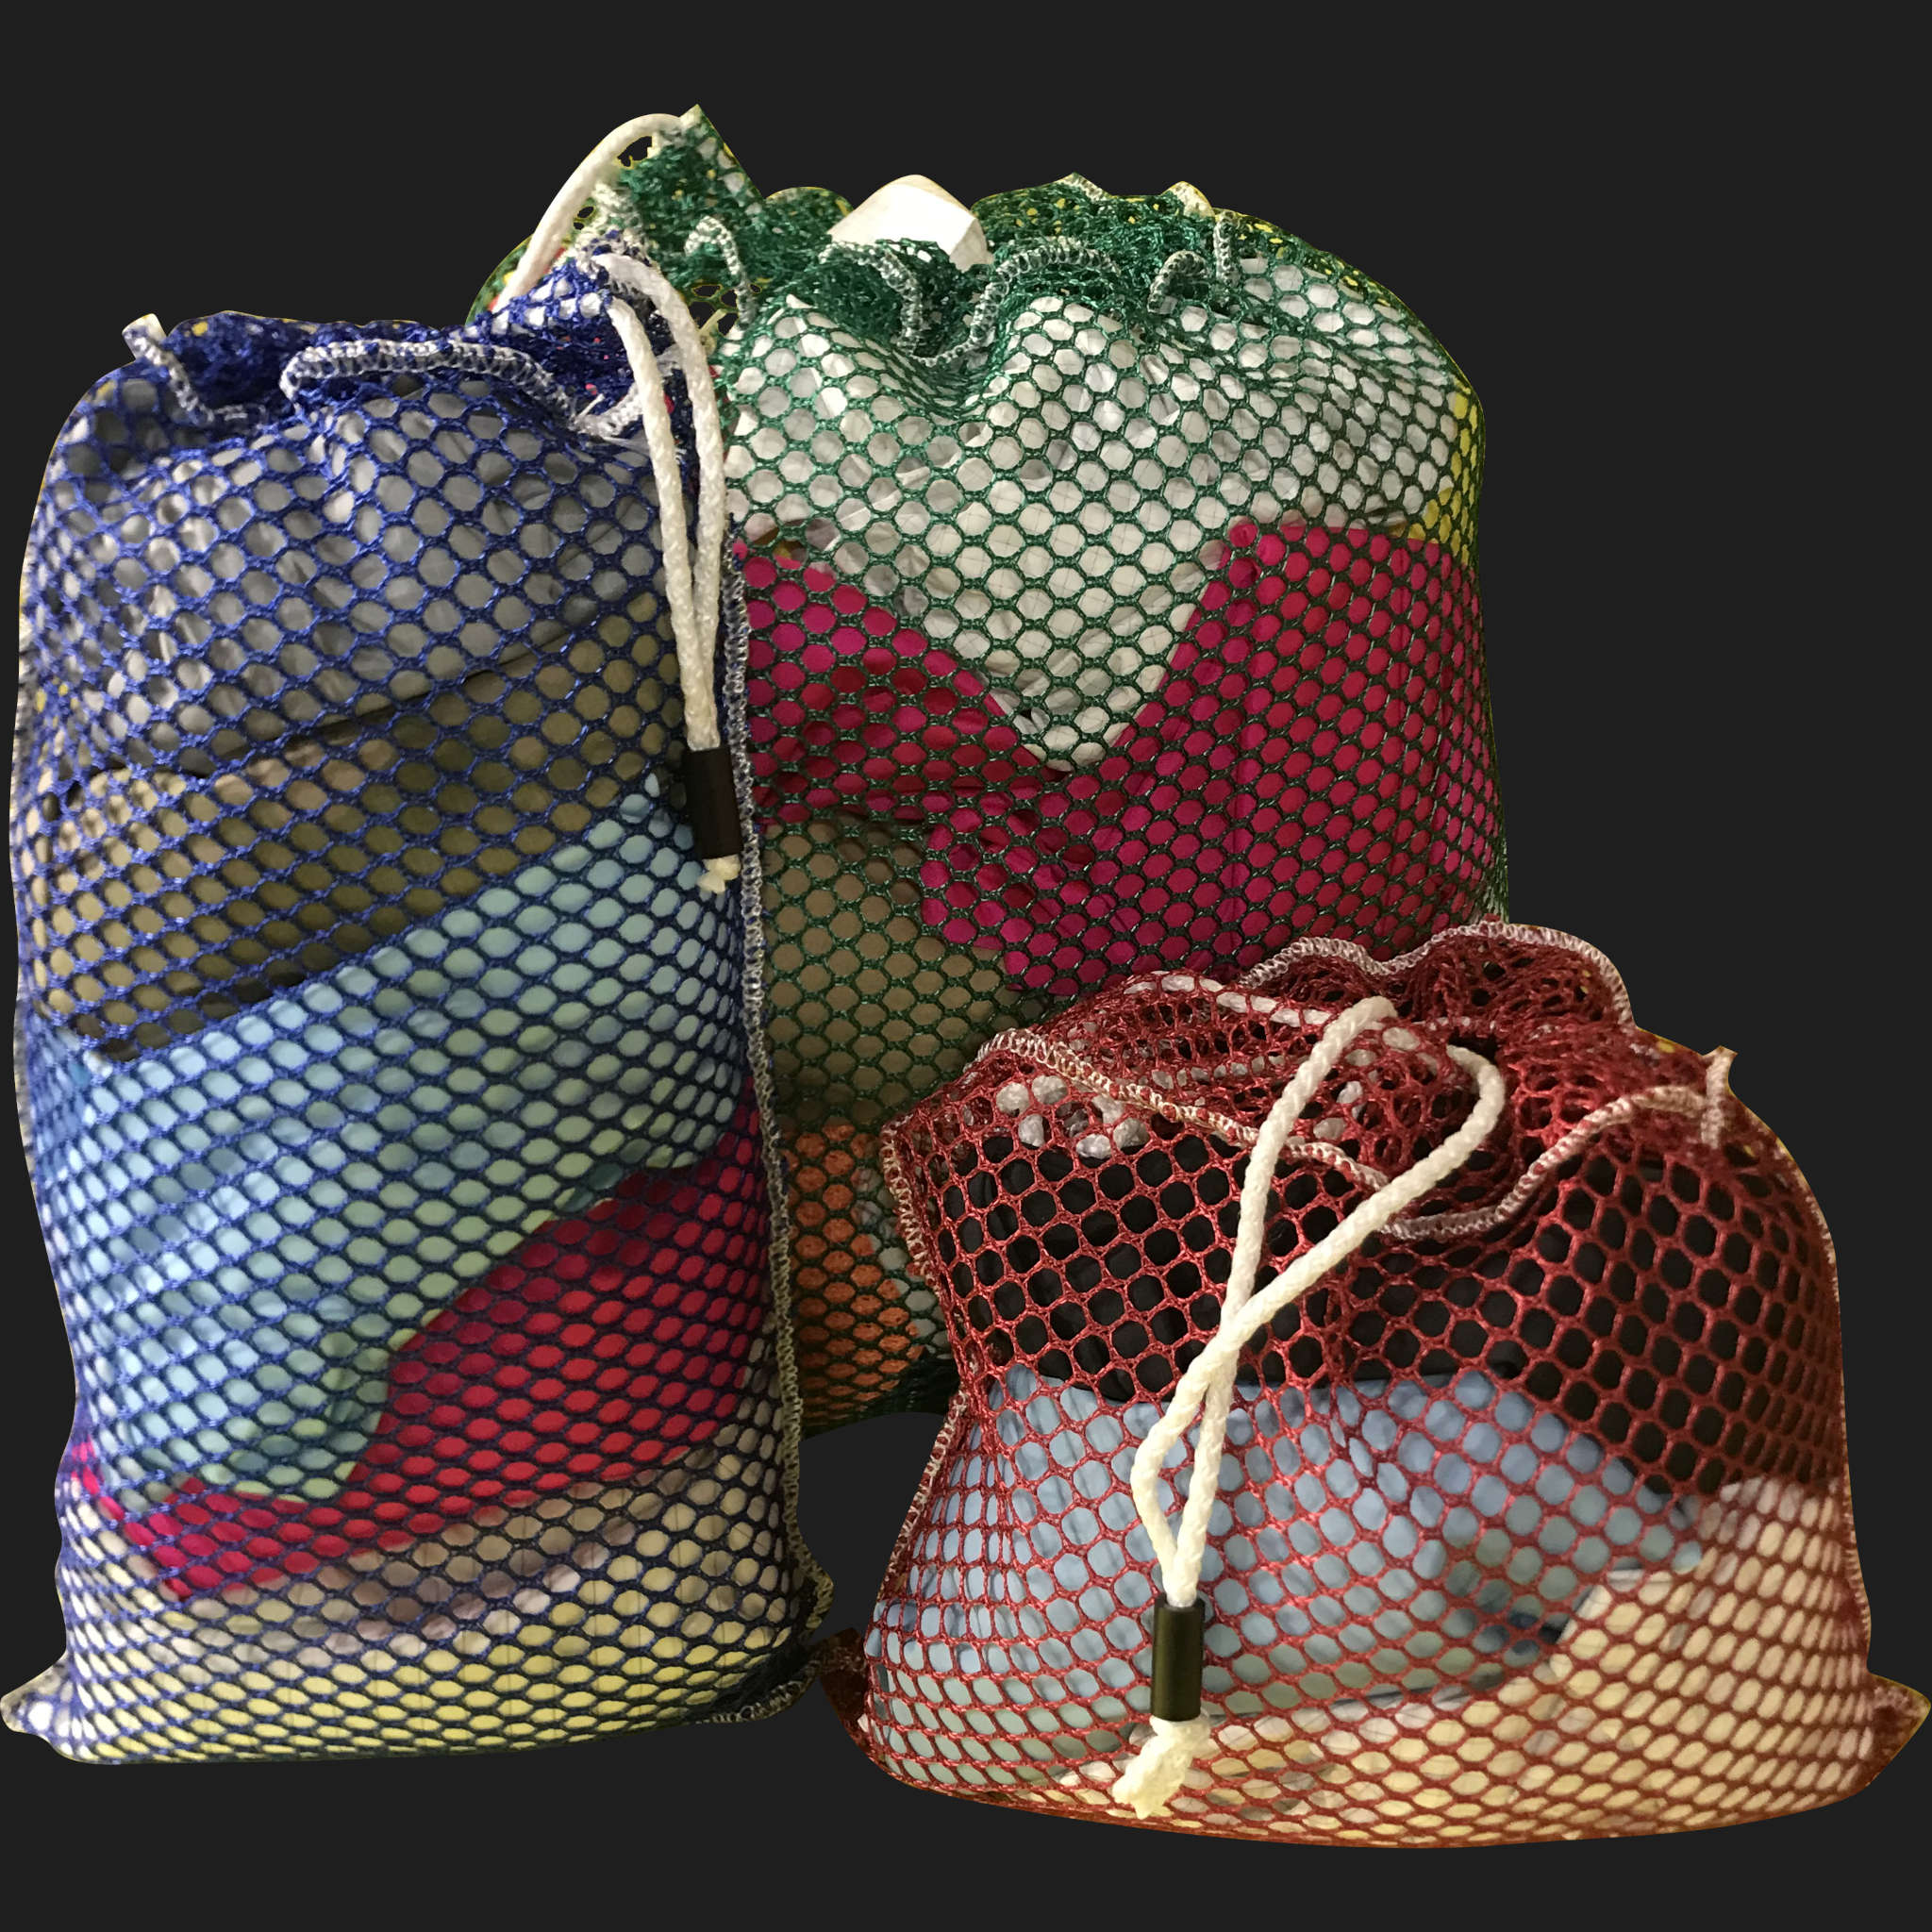 54" x 66" Customized Mesh-Net-Laundry Bags Heavy Duty with Cord and barrellock closure